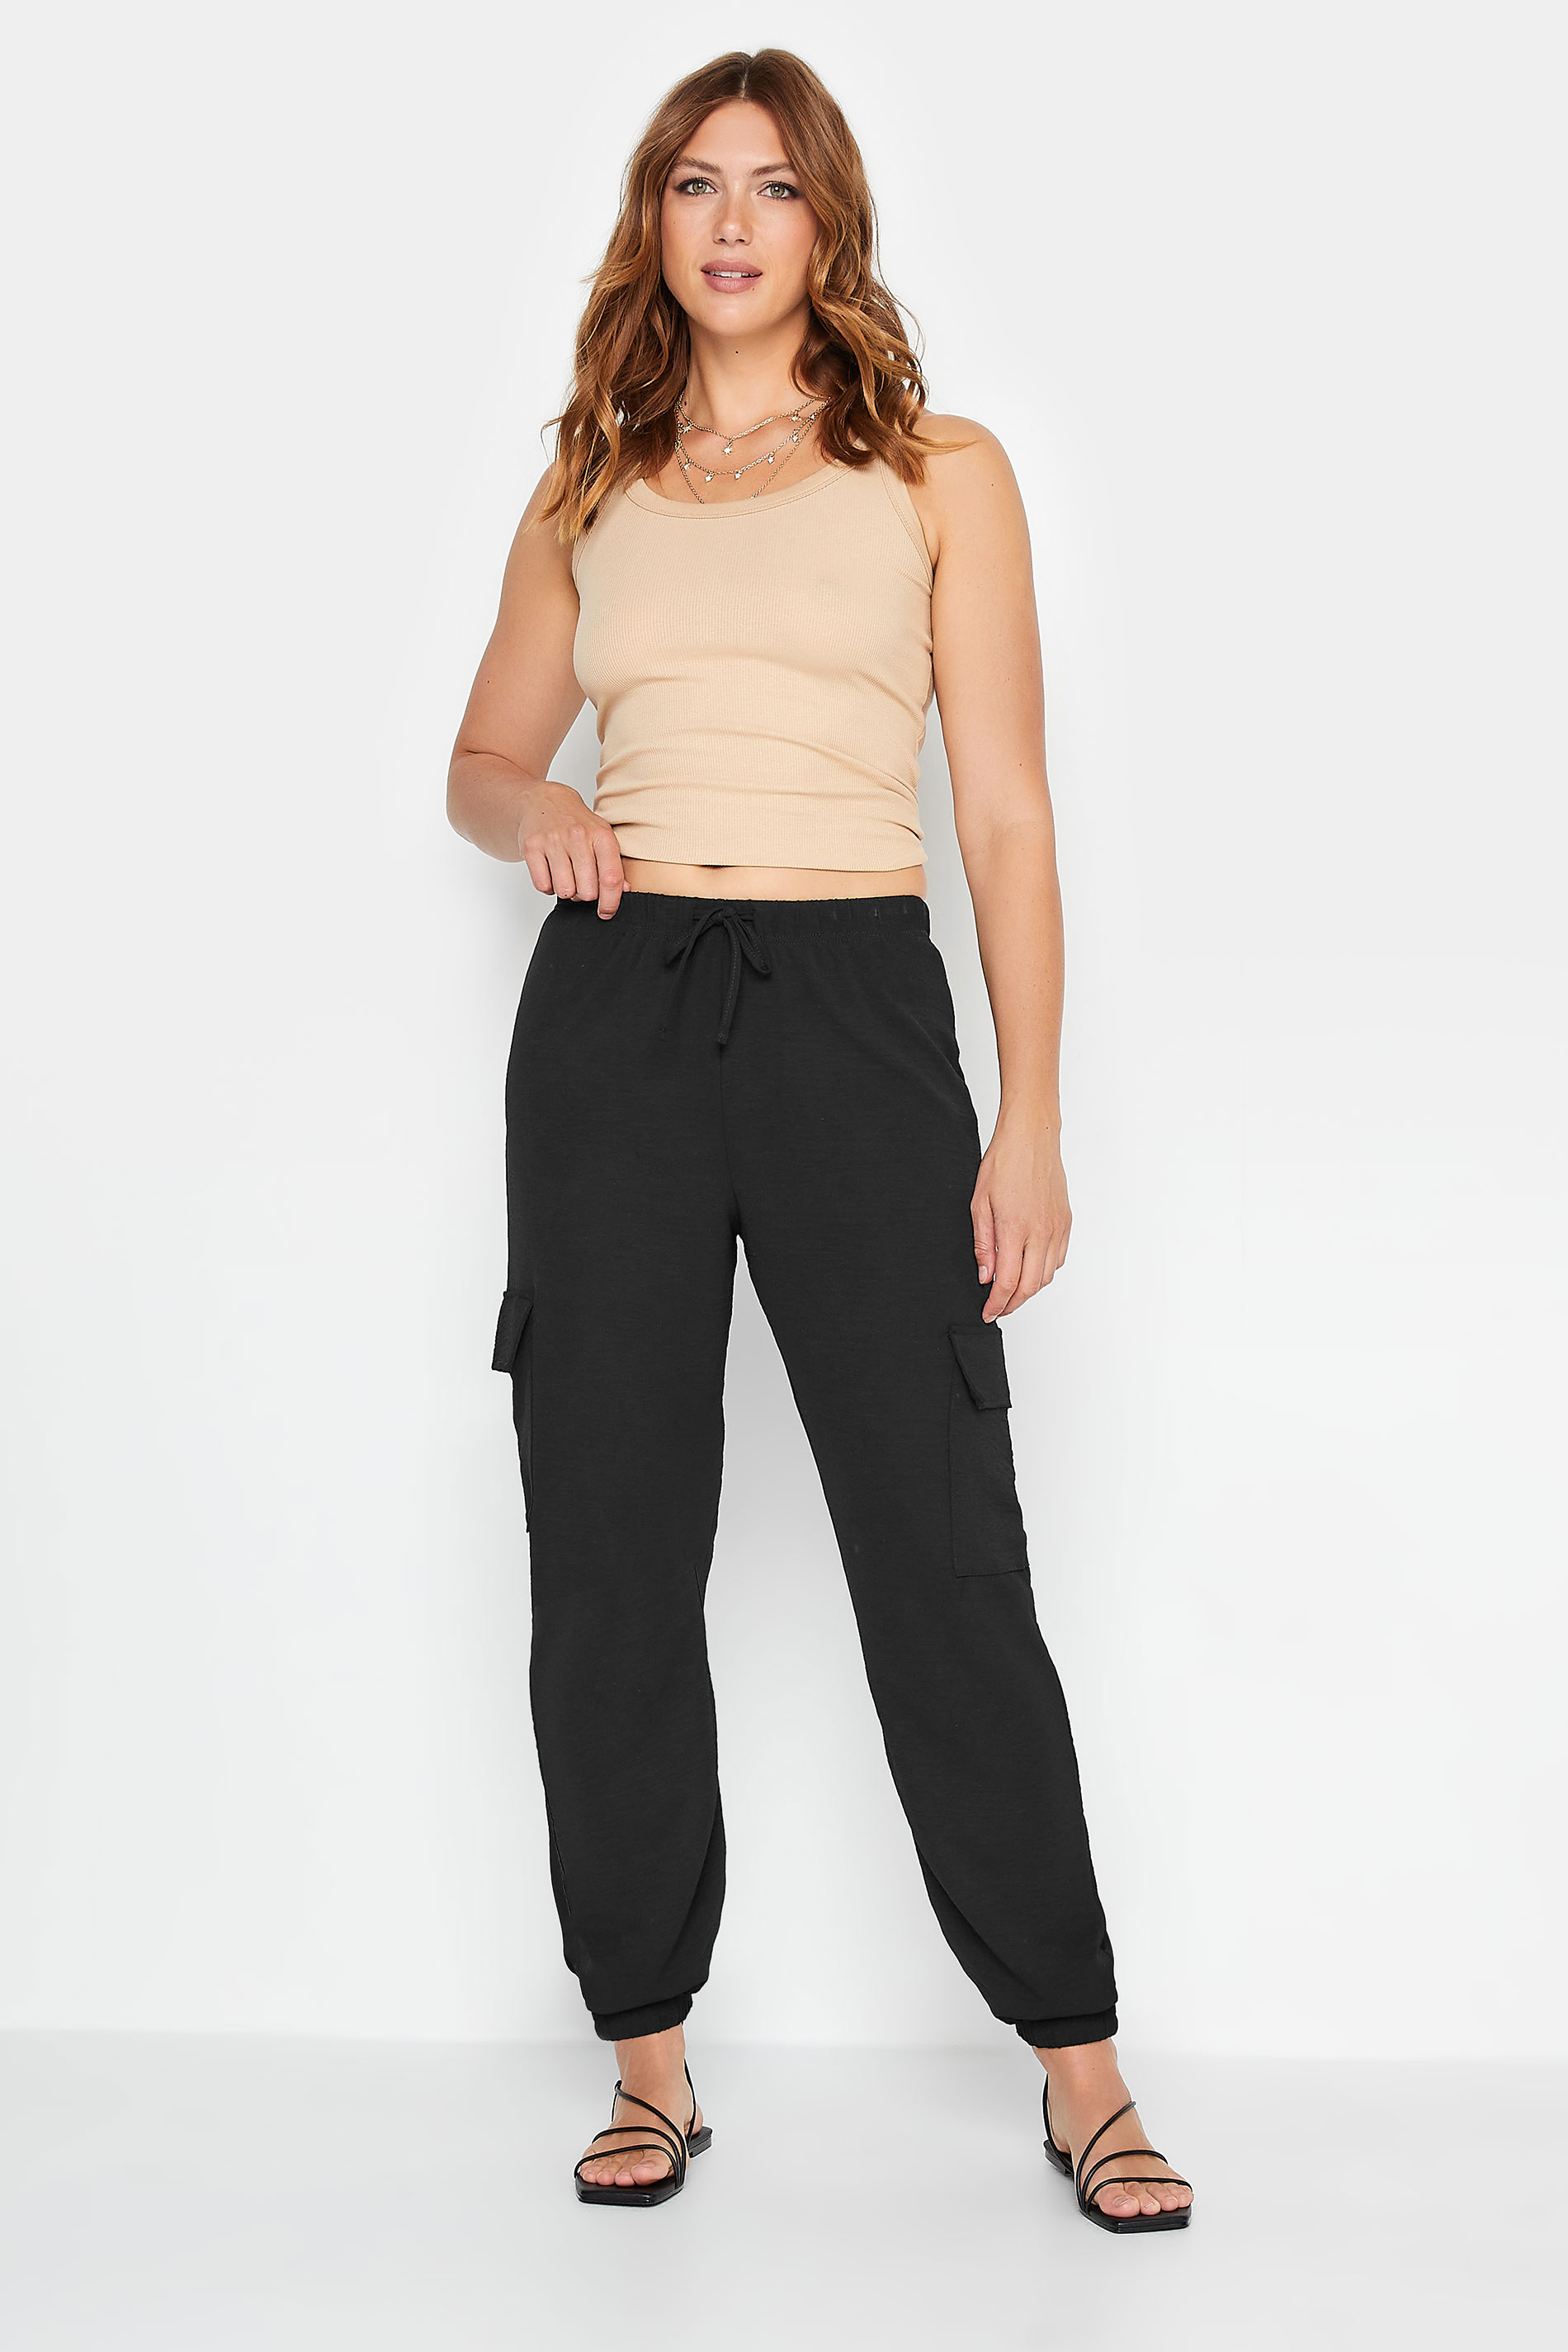 Buy Women's Long Tall Sally Cuff/ Pull On Trousers Online